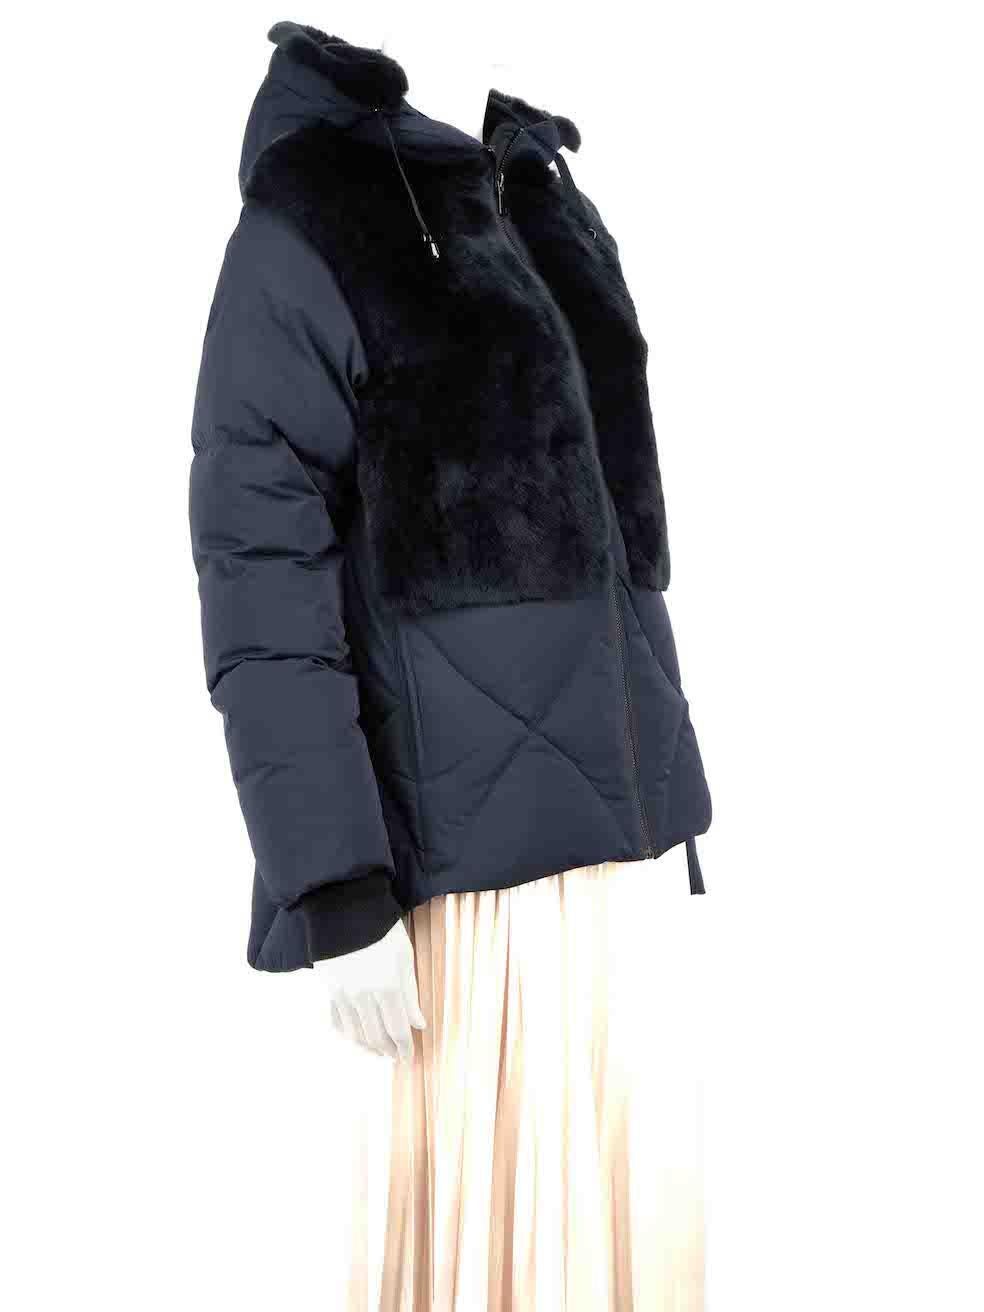 CONDITION is Very good. Hardly any visible wear to jacket is evident on this used Divine Cashmere designer resale item.
 
Details
Navy
Polyester
Down coat
Goose feather and down filling
Rabbit fur panels
Detachable hood
Zip fastening
2x Side